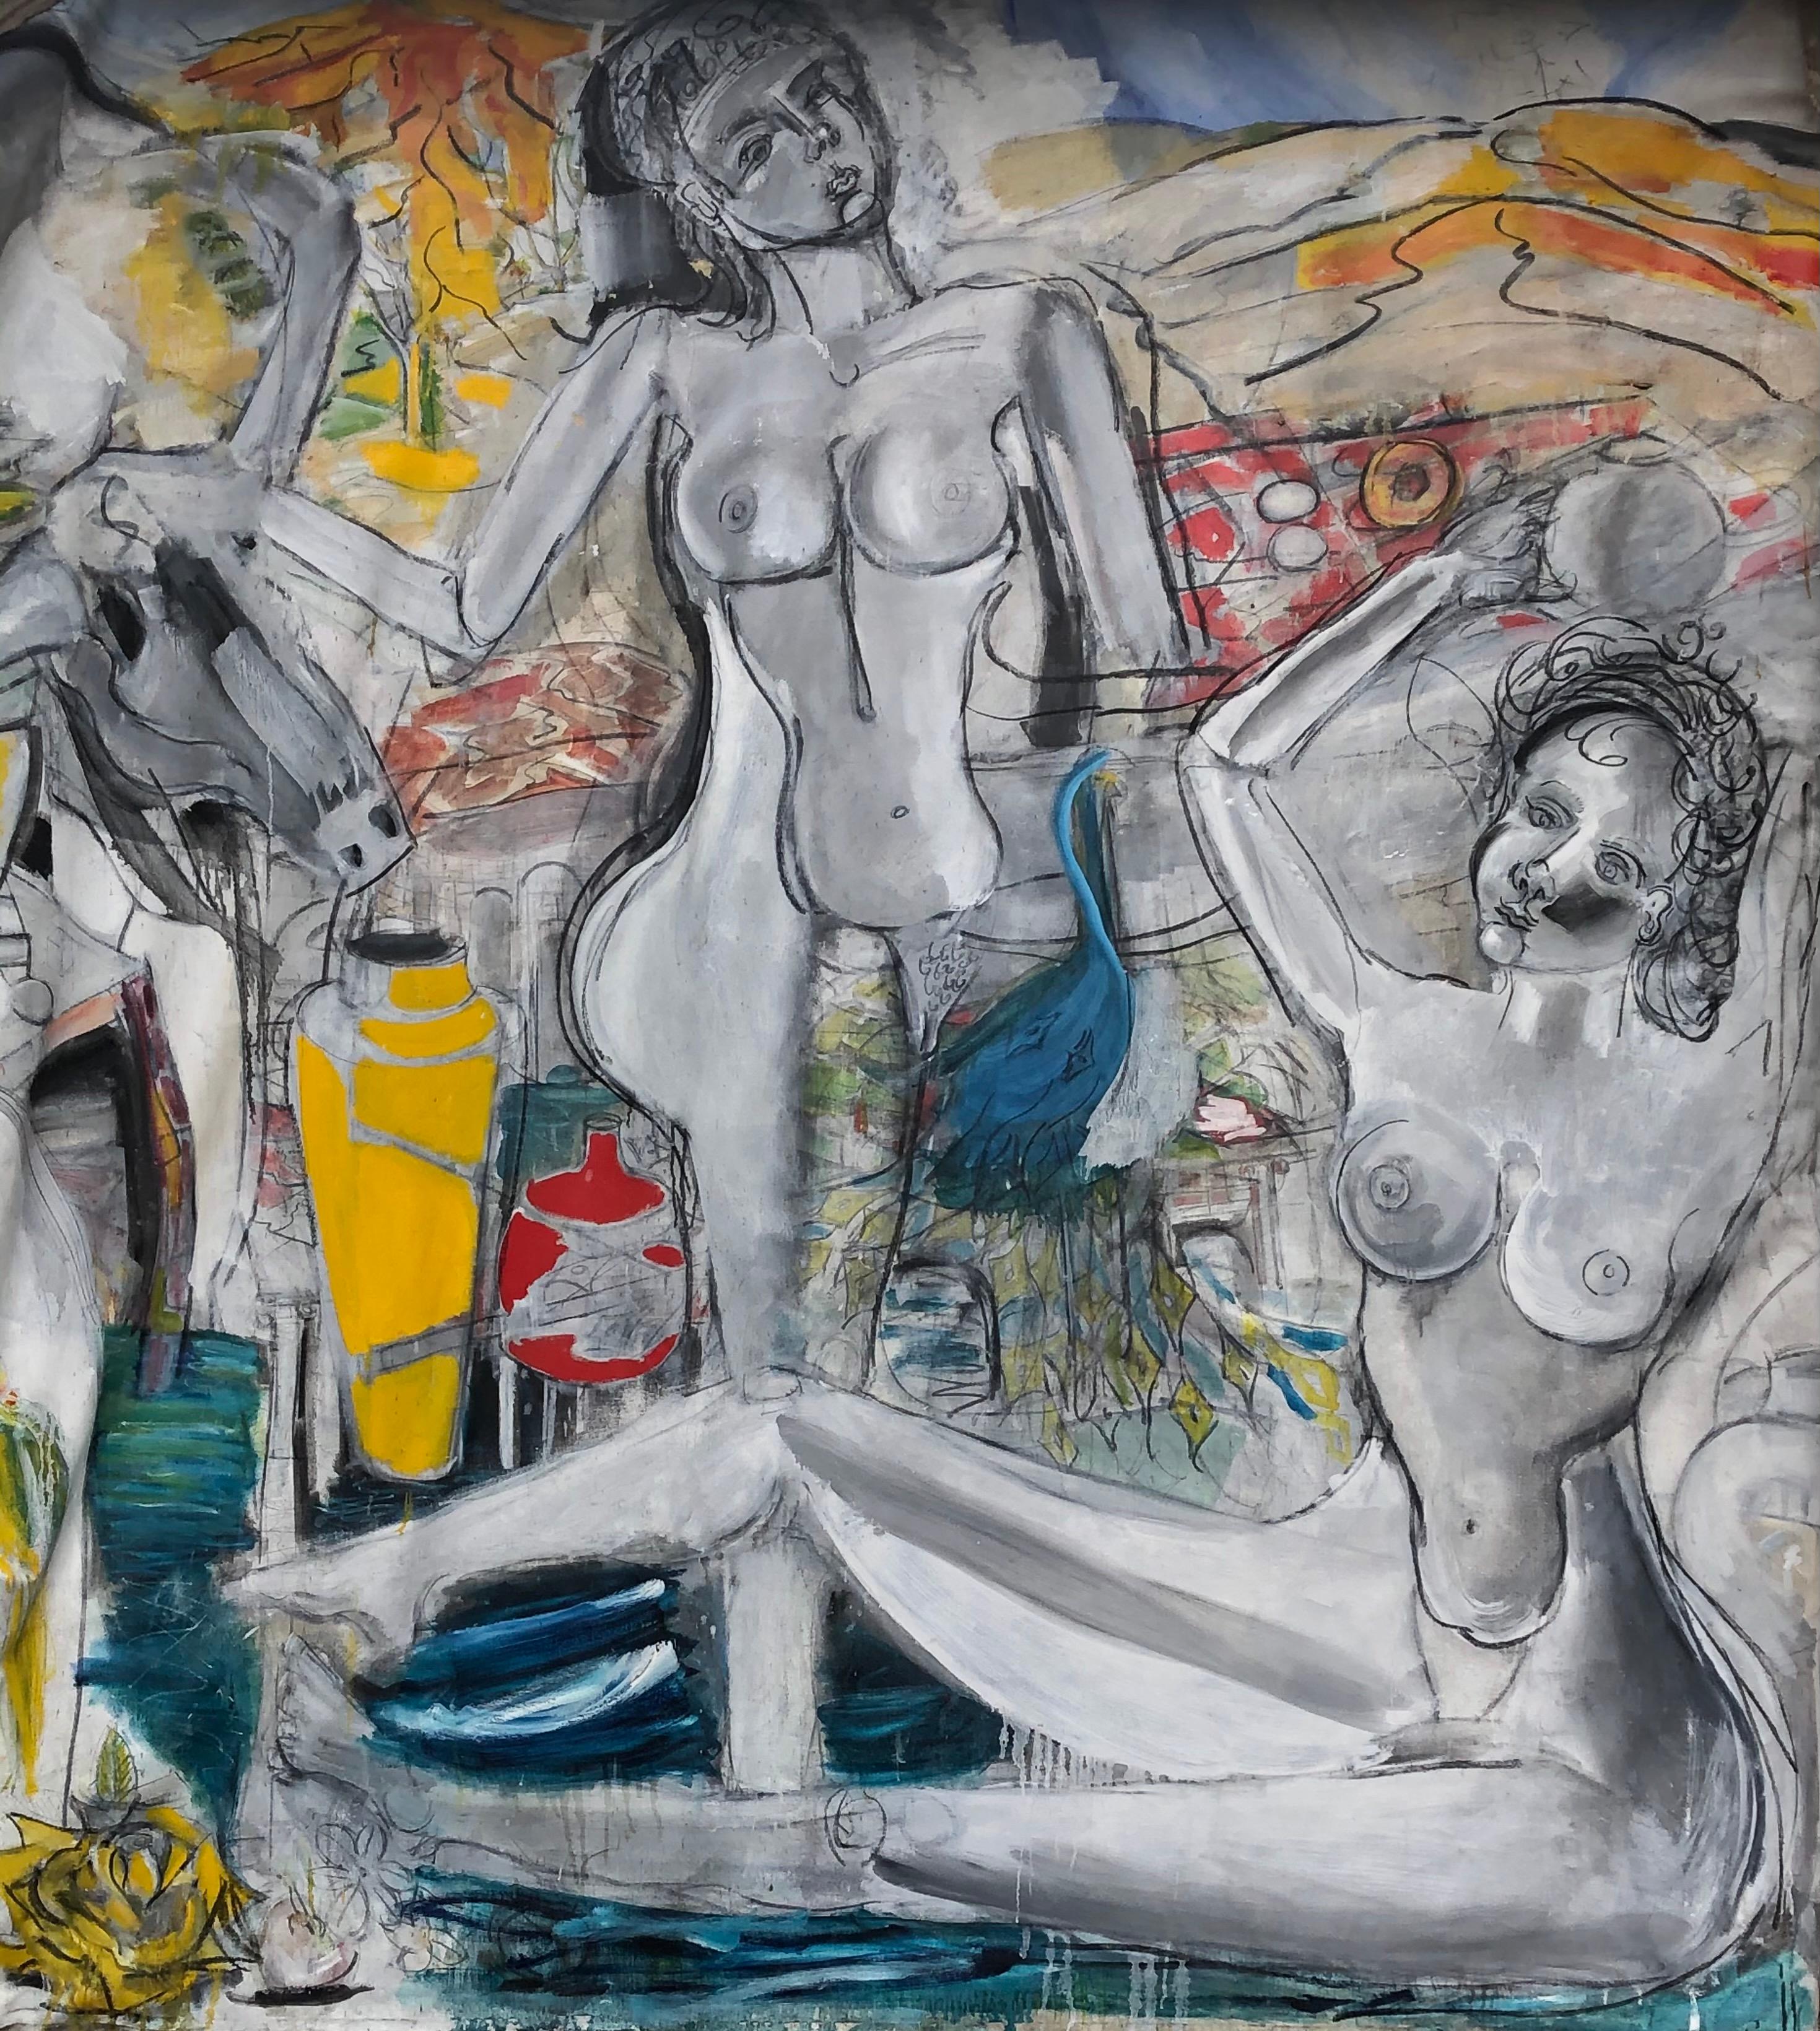 Steven H. Rehfeld Figurative Painting - Contemporary Figurative Women Models Abstract Painting O/C 11ft x 11ft By Steven